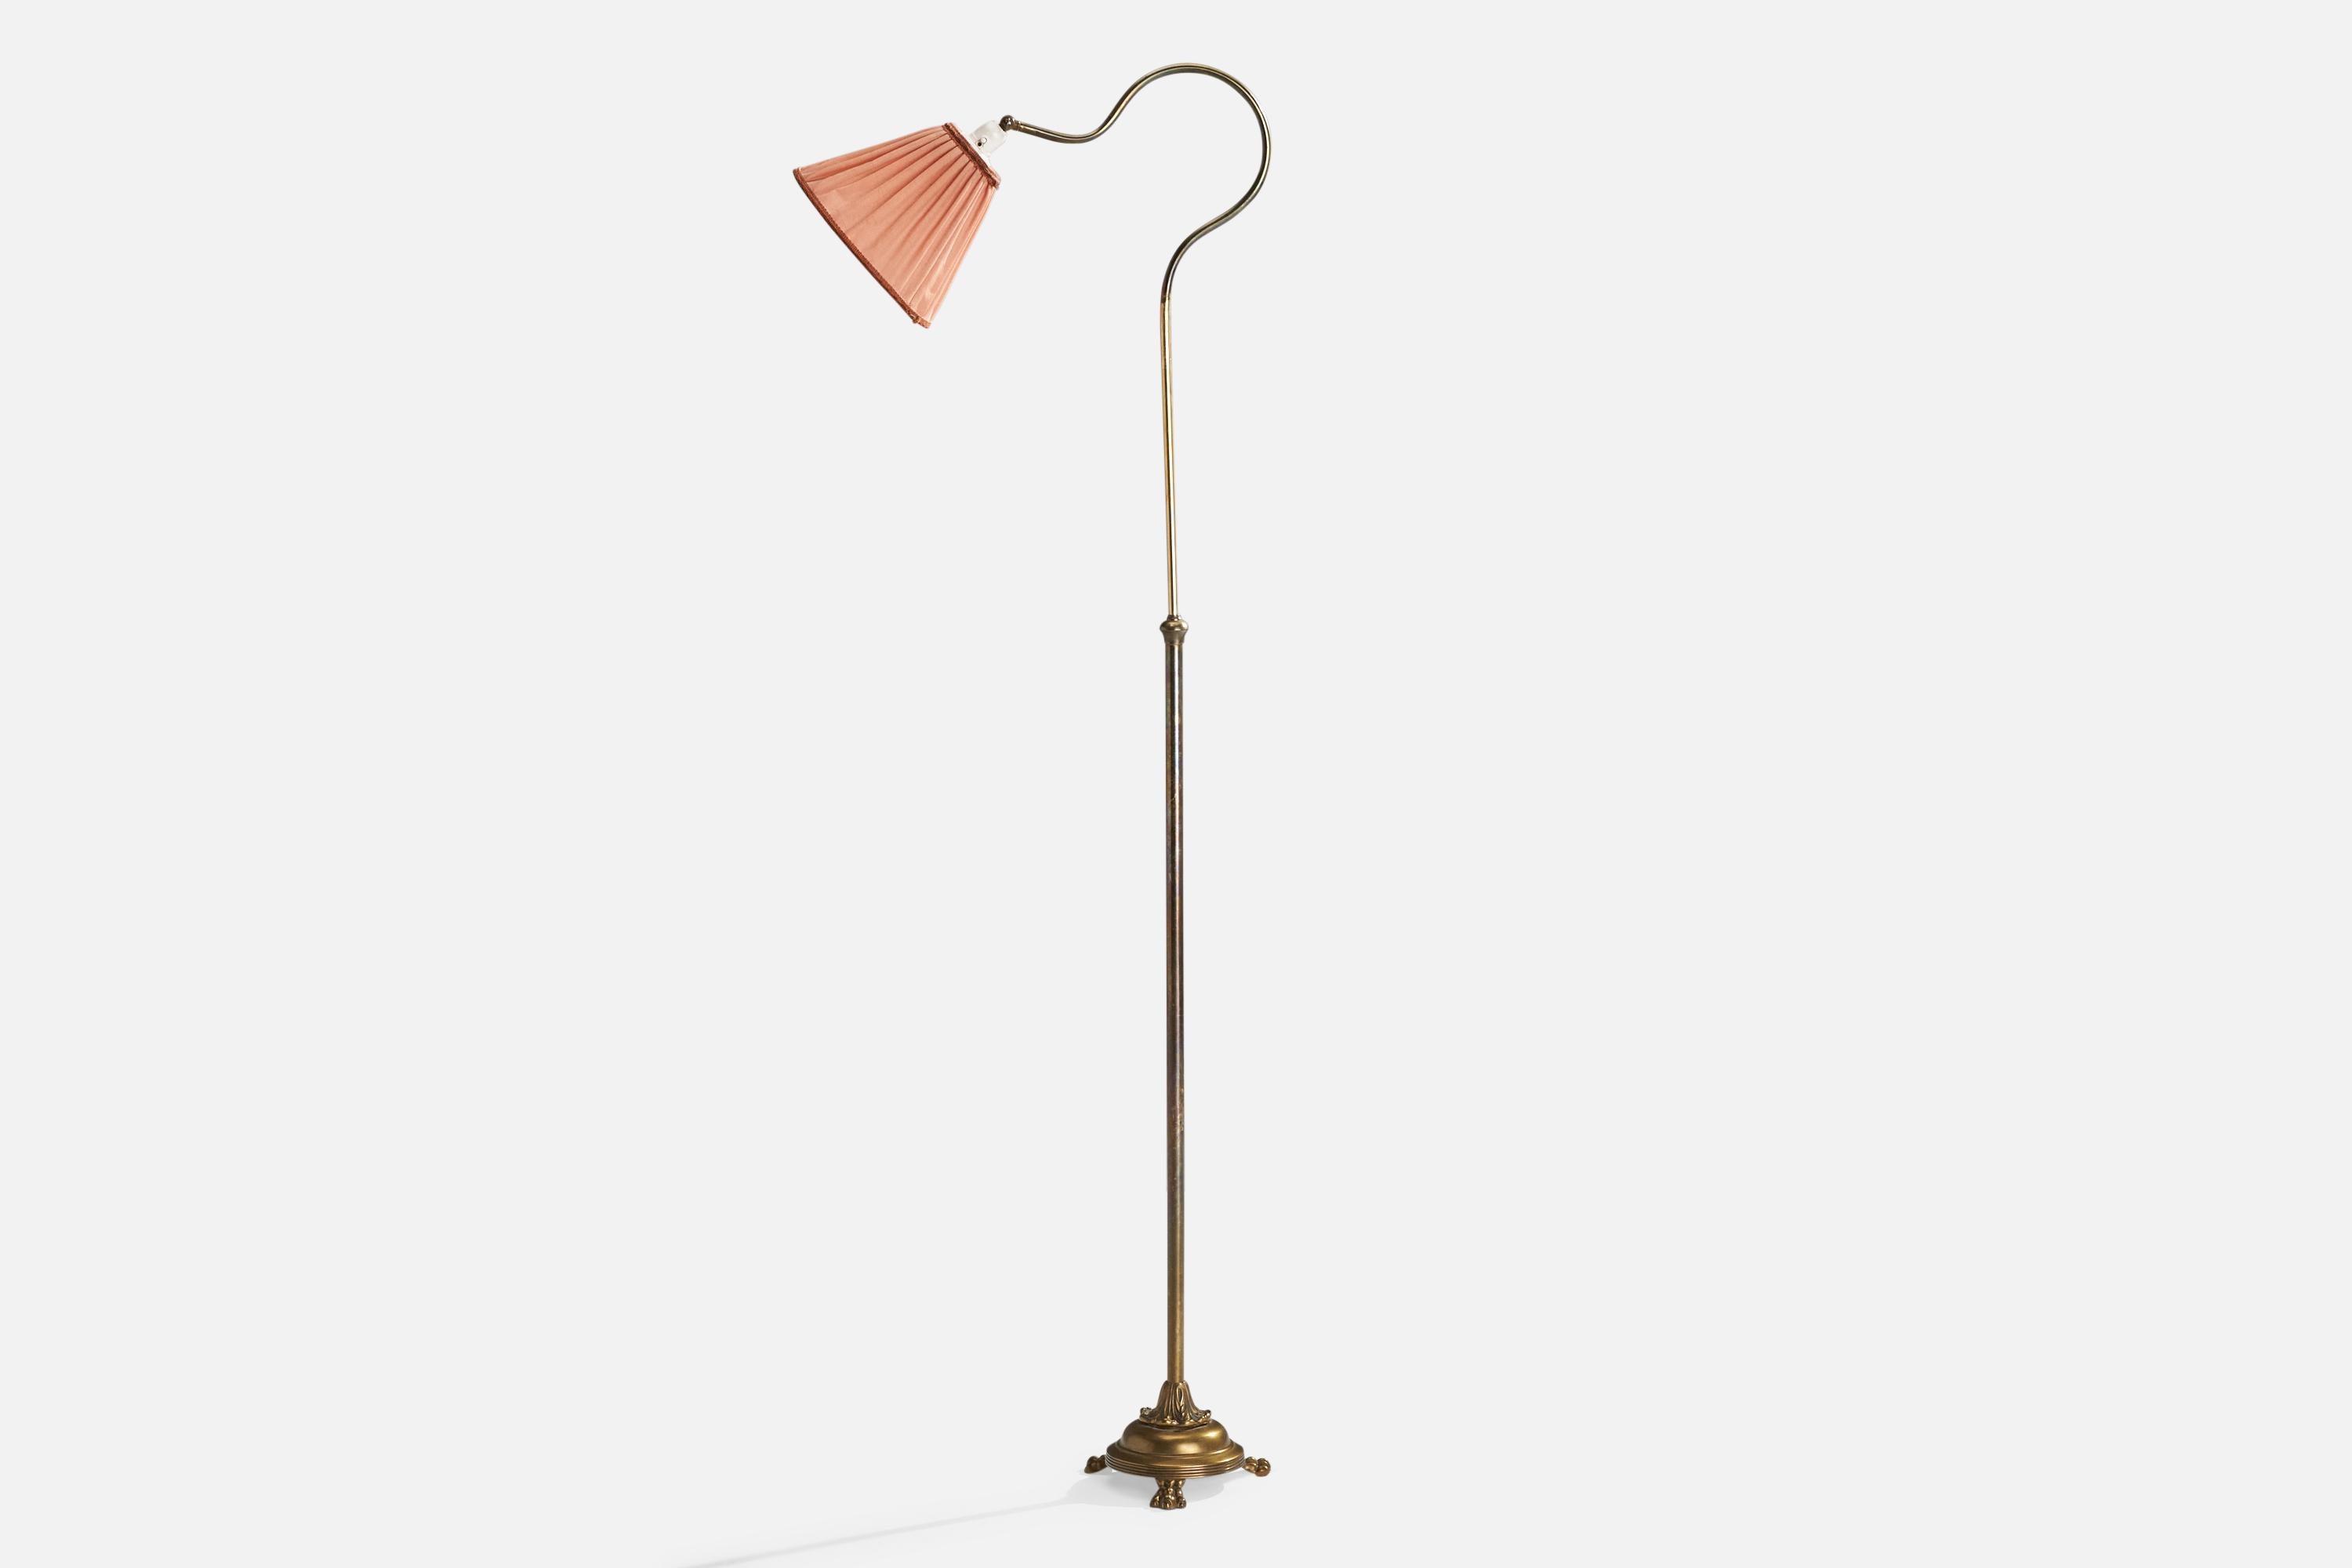 An adjustable brass and pink fabric floor lamp designed and produced in Sweden, c. 1940s.

Overall Dimensions (inches): 54.5” H x 10” W x 19.75” D
Stated dimensions include shade.
Bulb Specifications: E-26 Bulb
Number of Sockets: 1
All lighting will